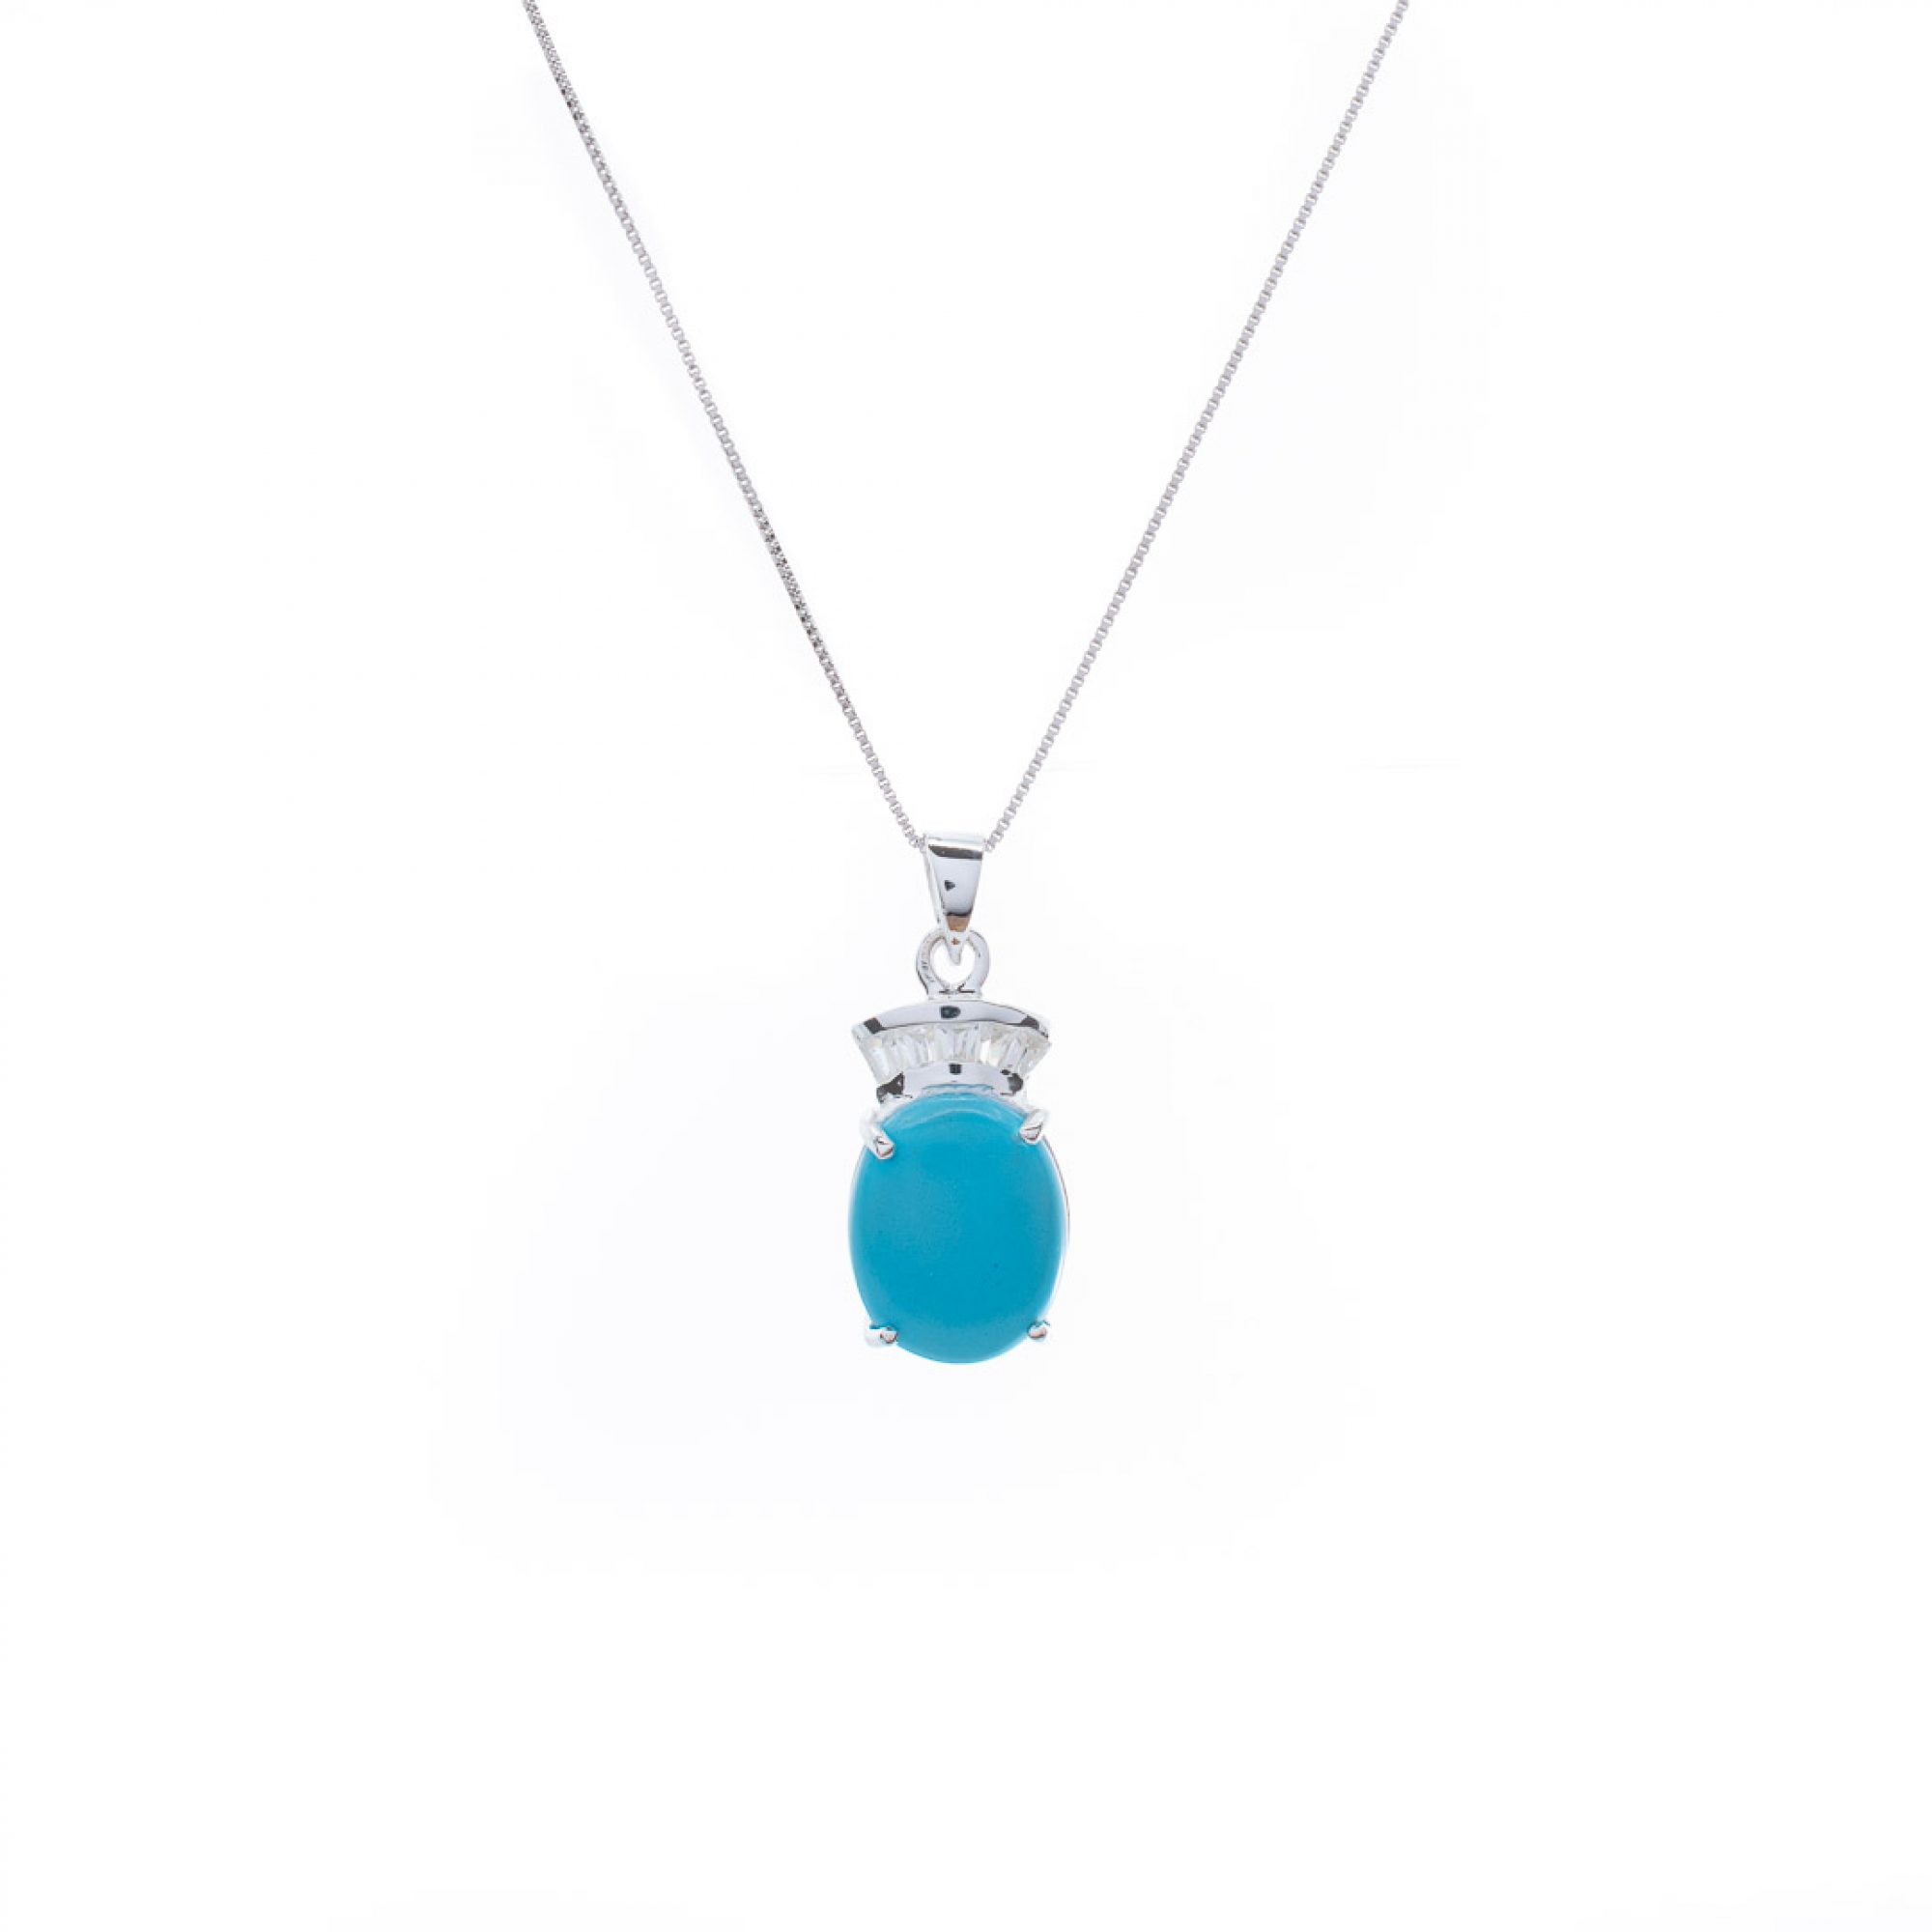 Necklace with natural turquoise and zircon stones